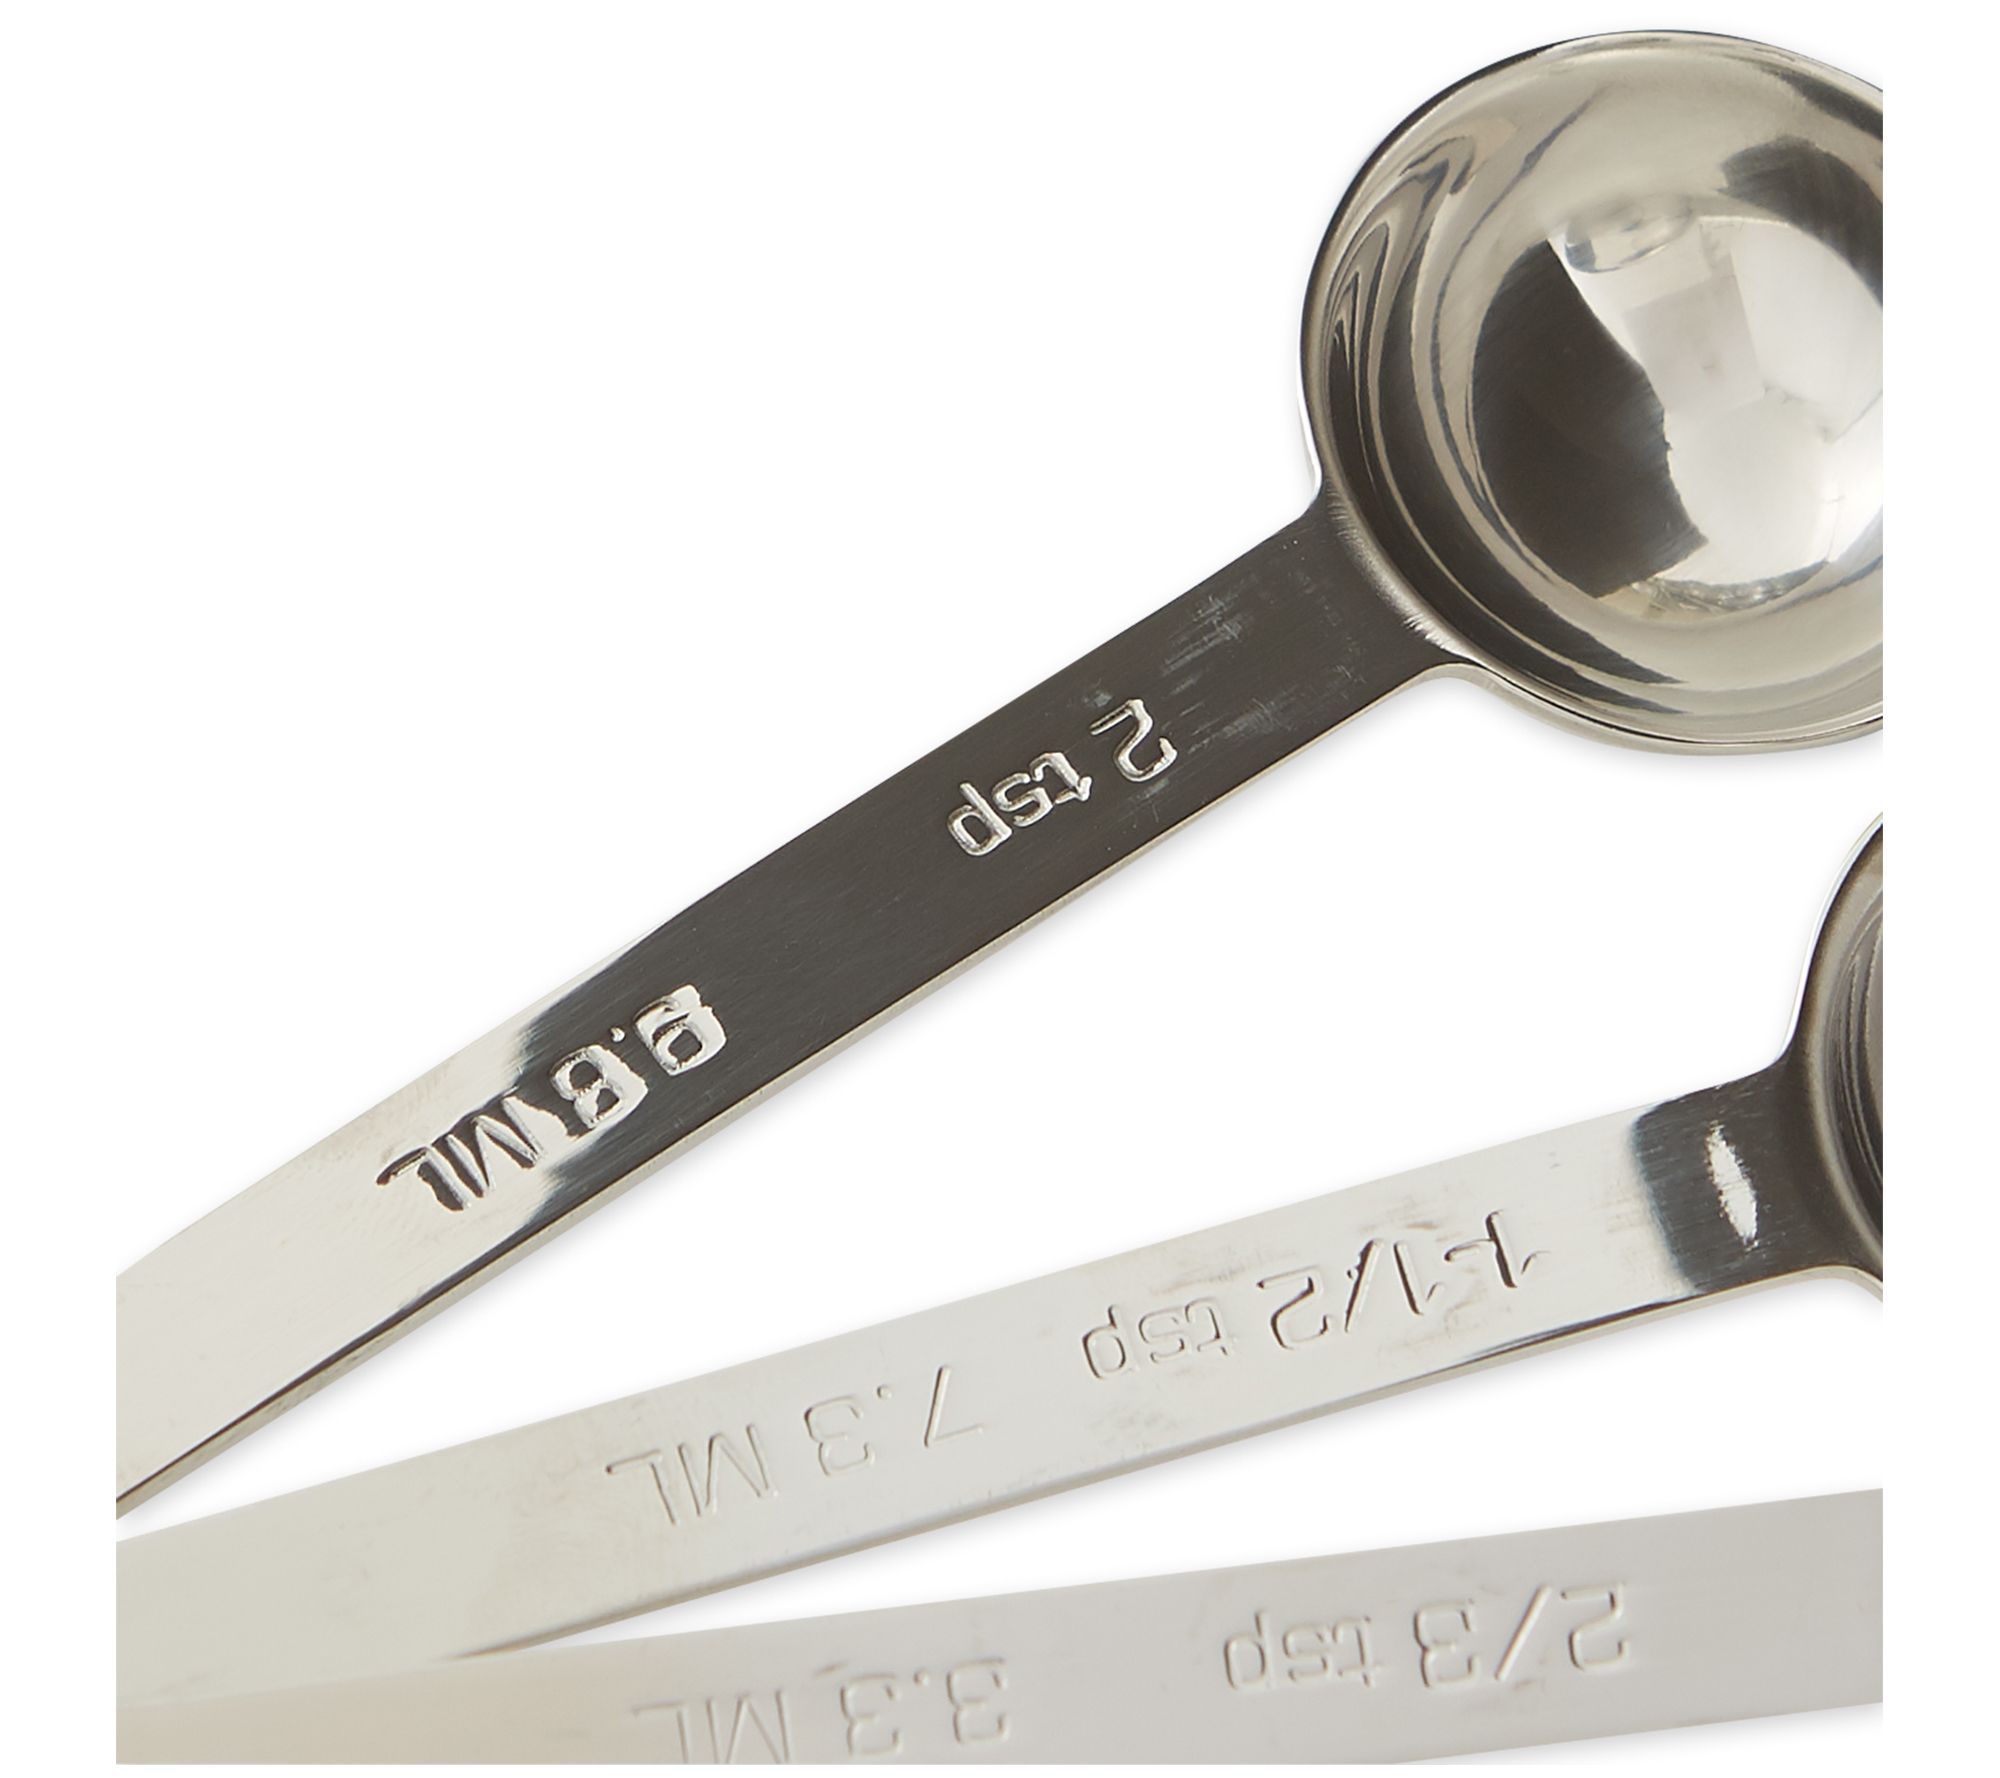 Labelled Mini Measuring Spoons Set of 5 - Inspire Uplift